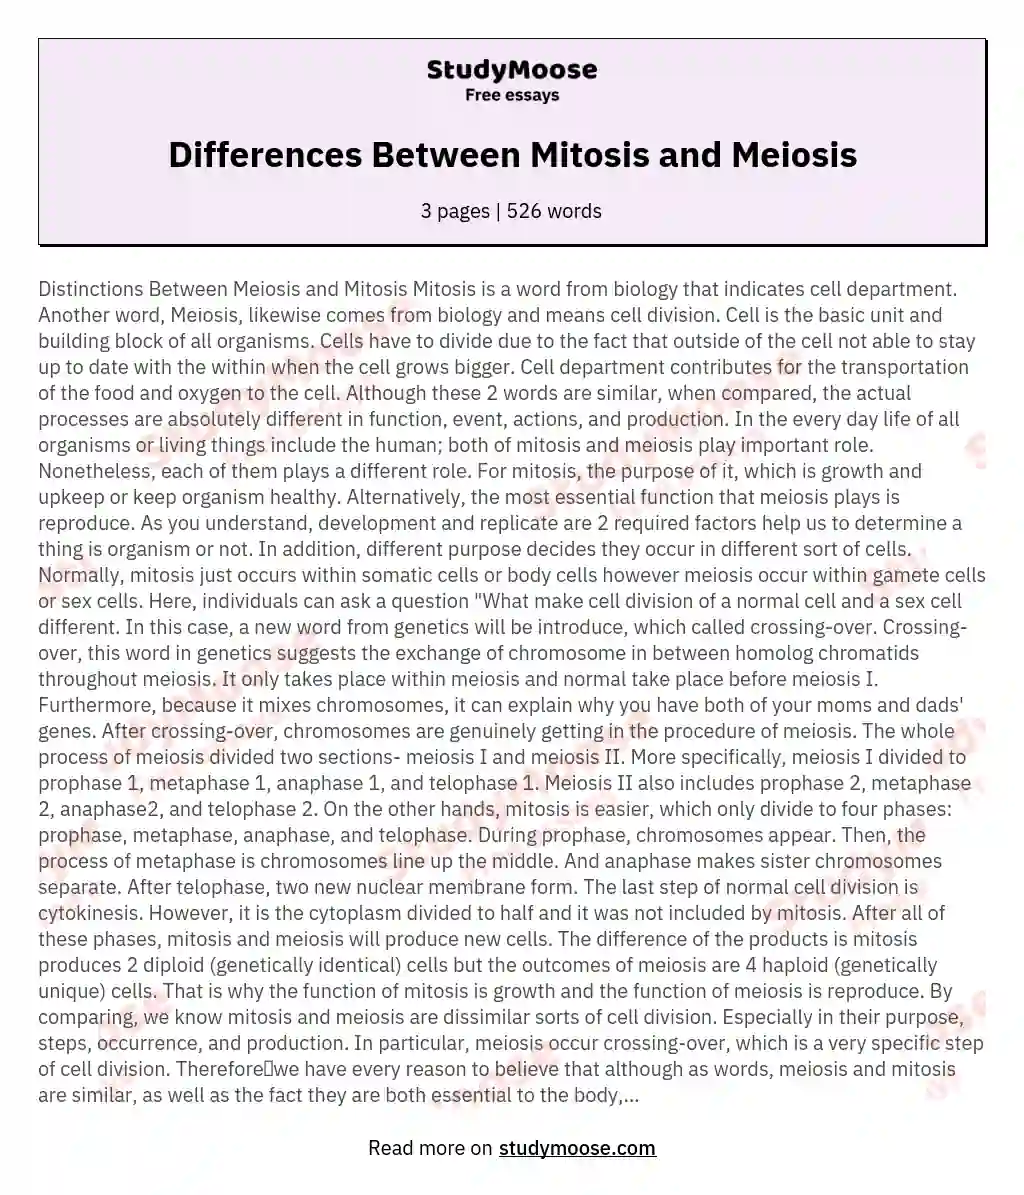 Differences Between Mitosis and Meiosis essay